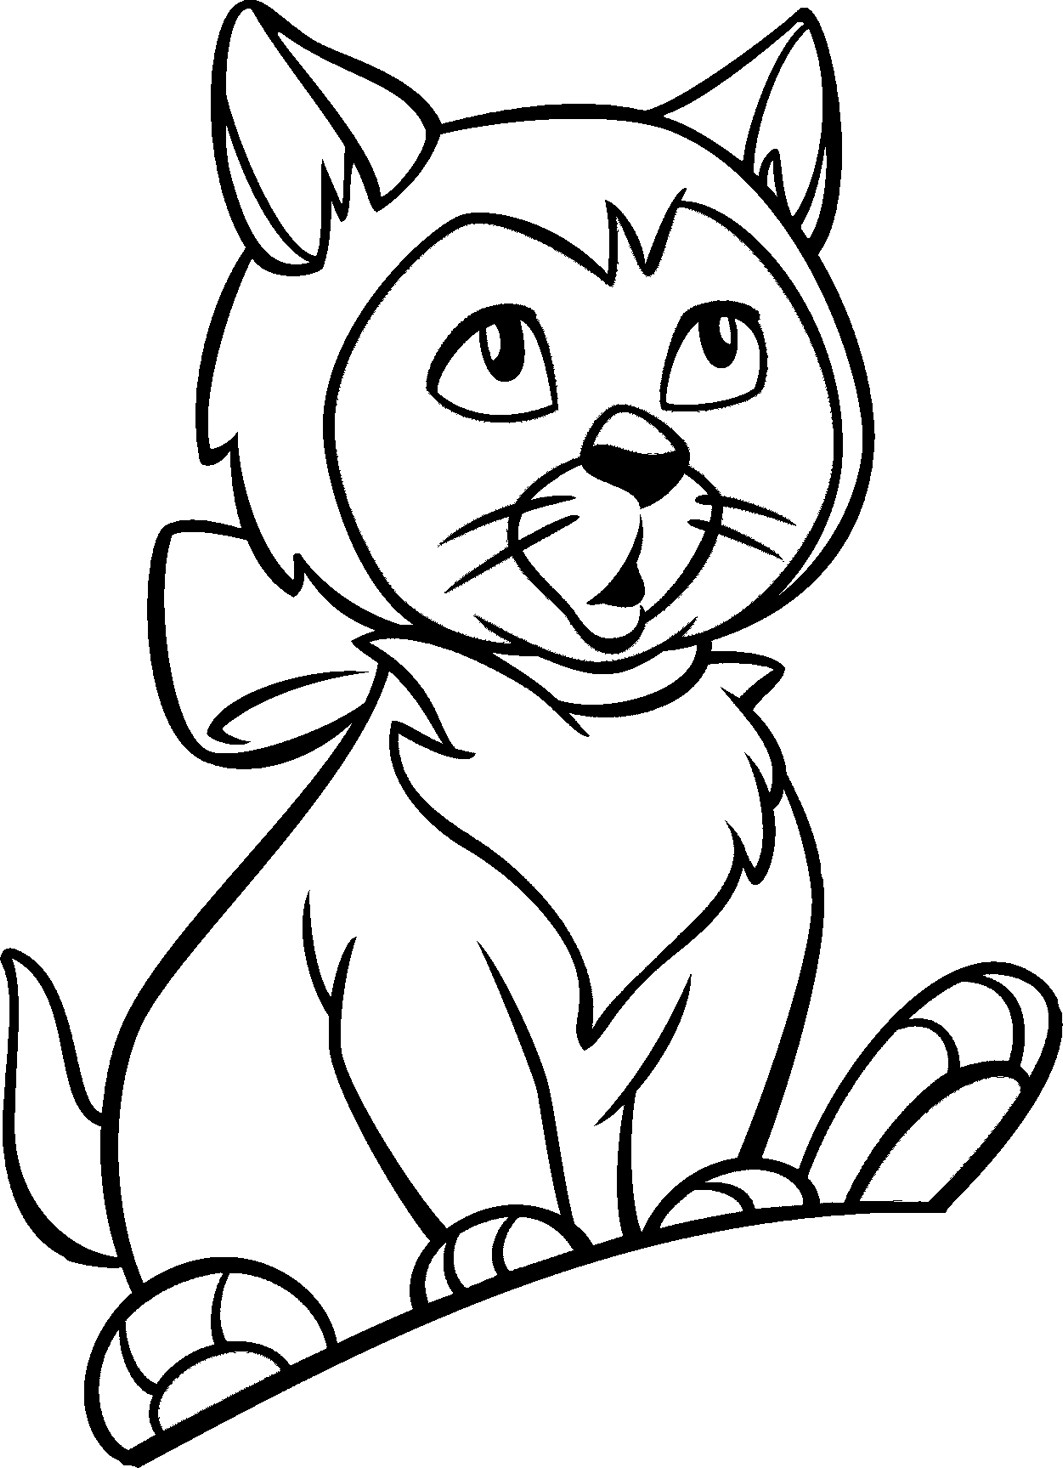 Kids Cat Coloring Pages
 Coloring Pages for Kids Cat Coloring Pages for Kids